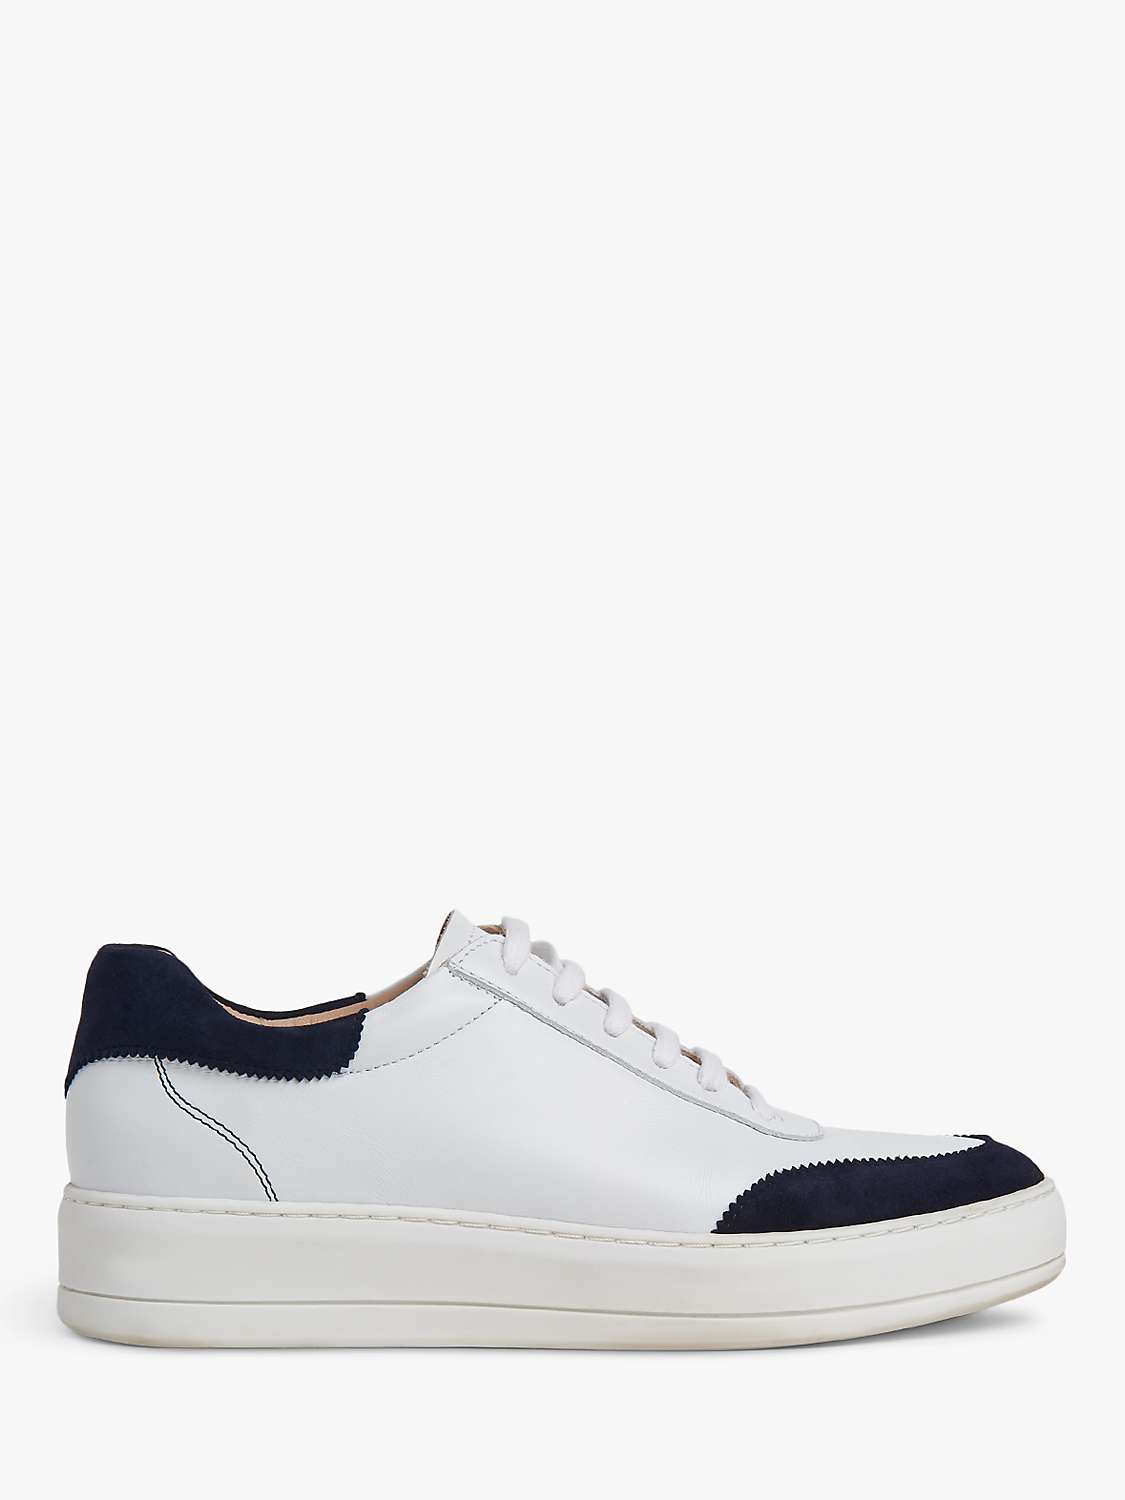 L.K.Bennett Leather Teddy Trainers, White/Navy at John Lewis & Partners